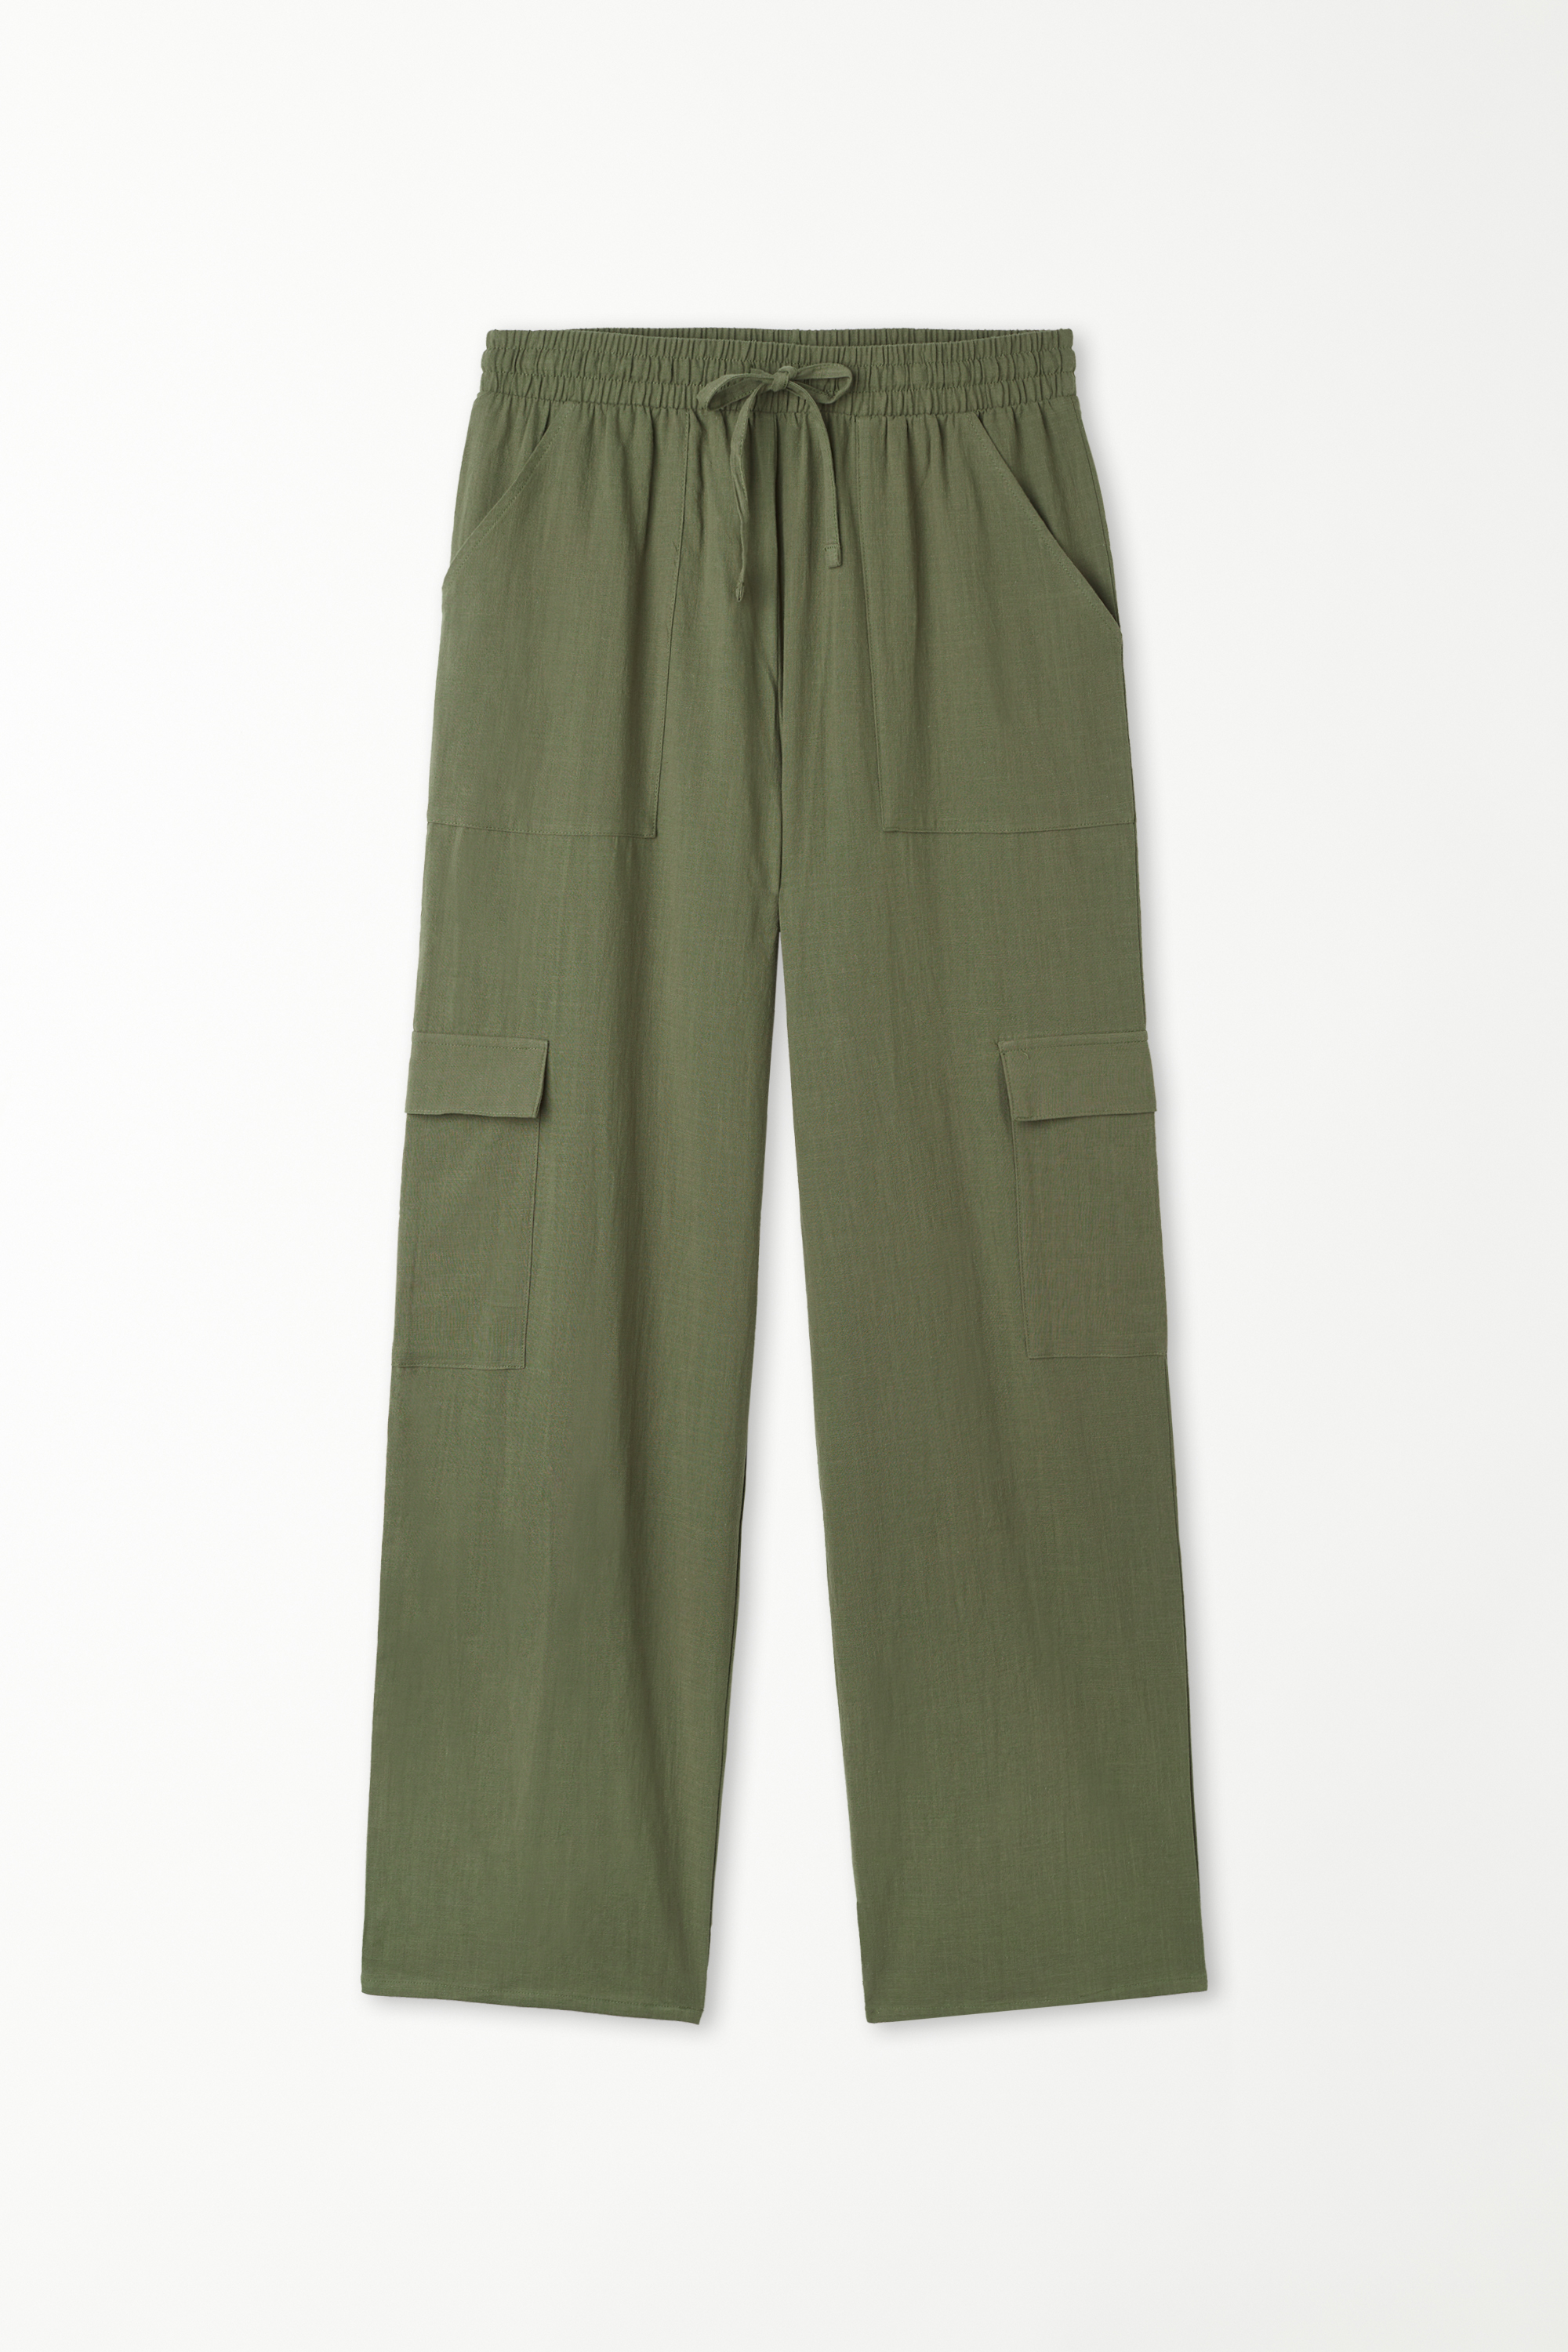 Full Length 100% Cotton Cloth Pants with Pockets